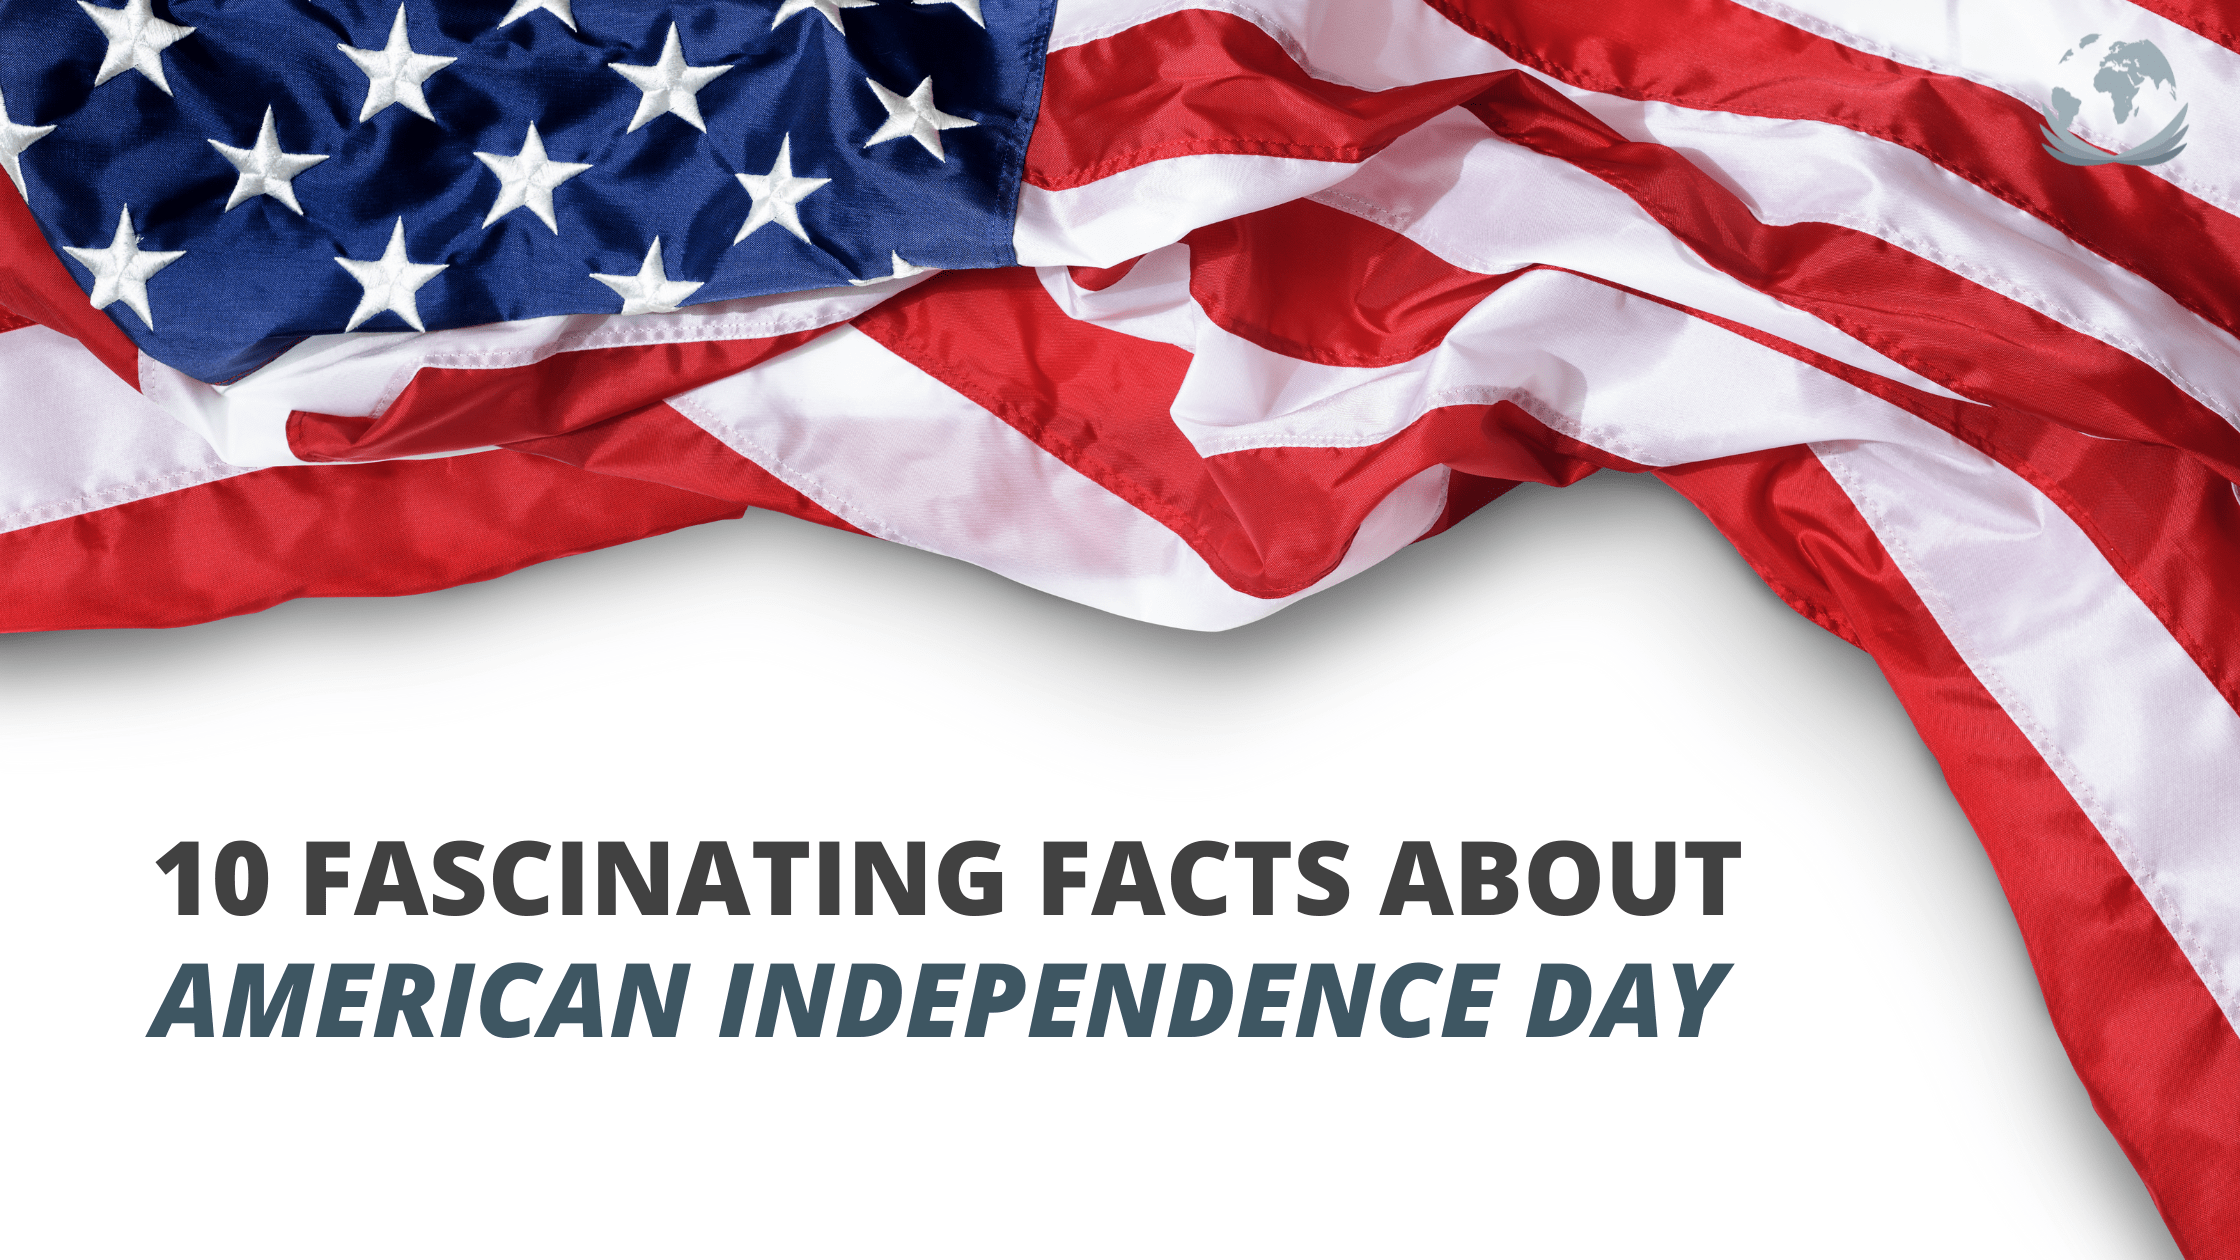 10 Fascinating Facts About American Independence Day - 4th of July and of course a few stories.